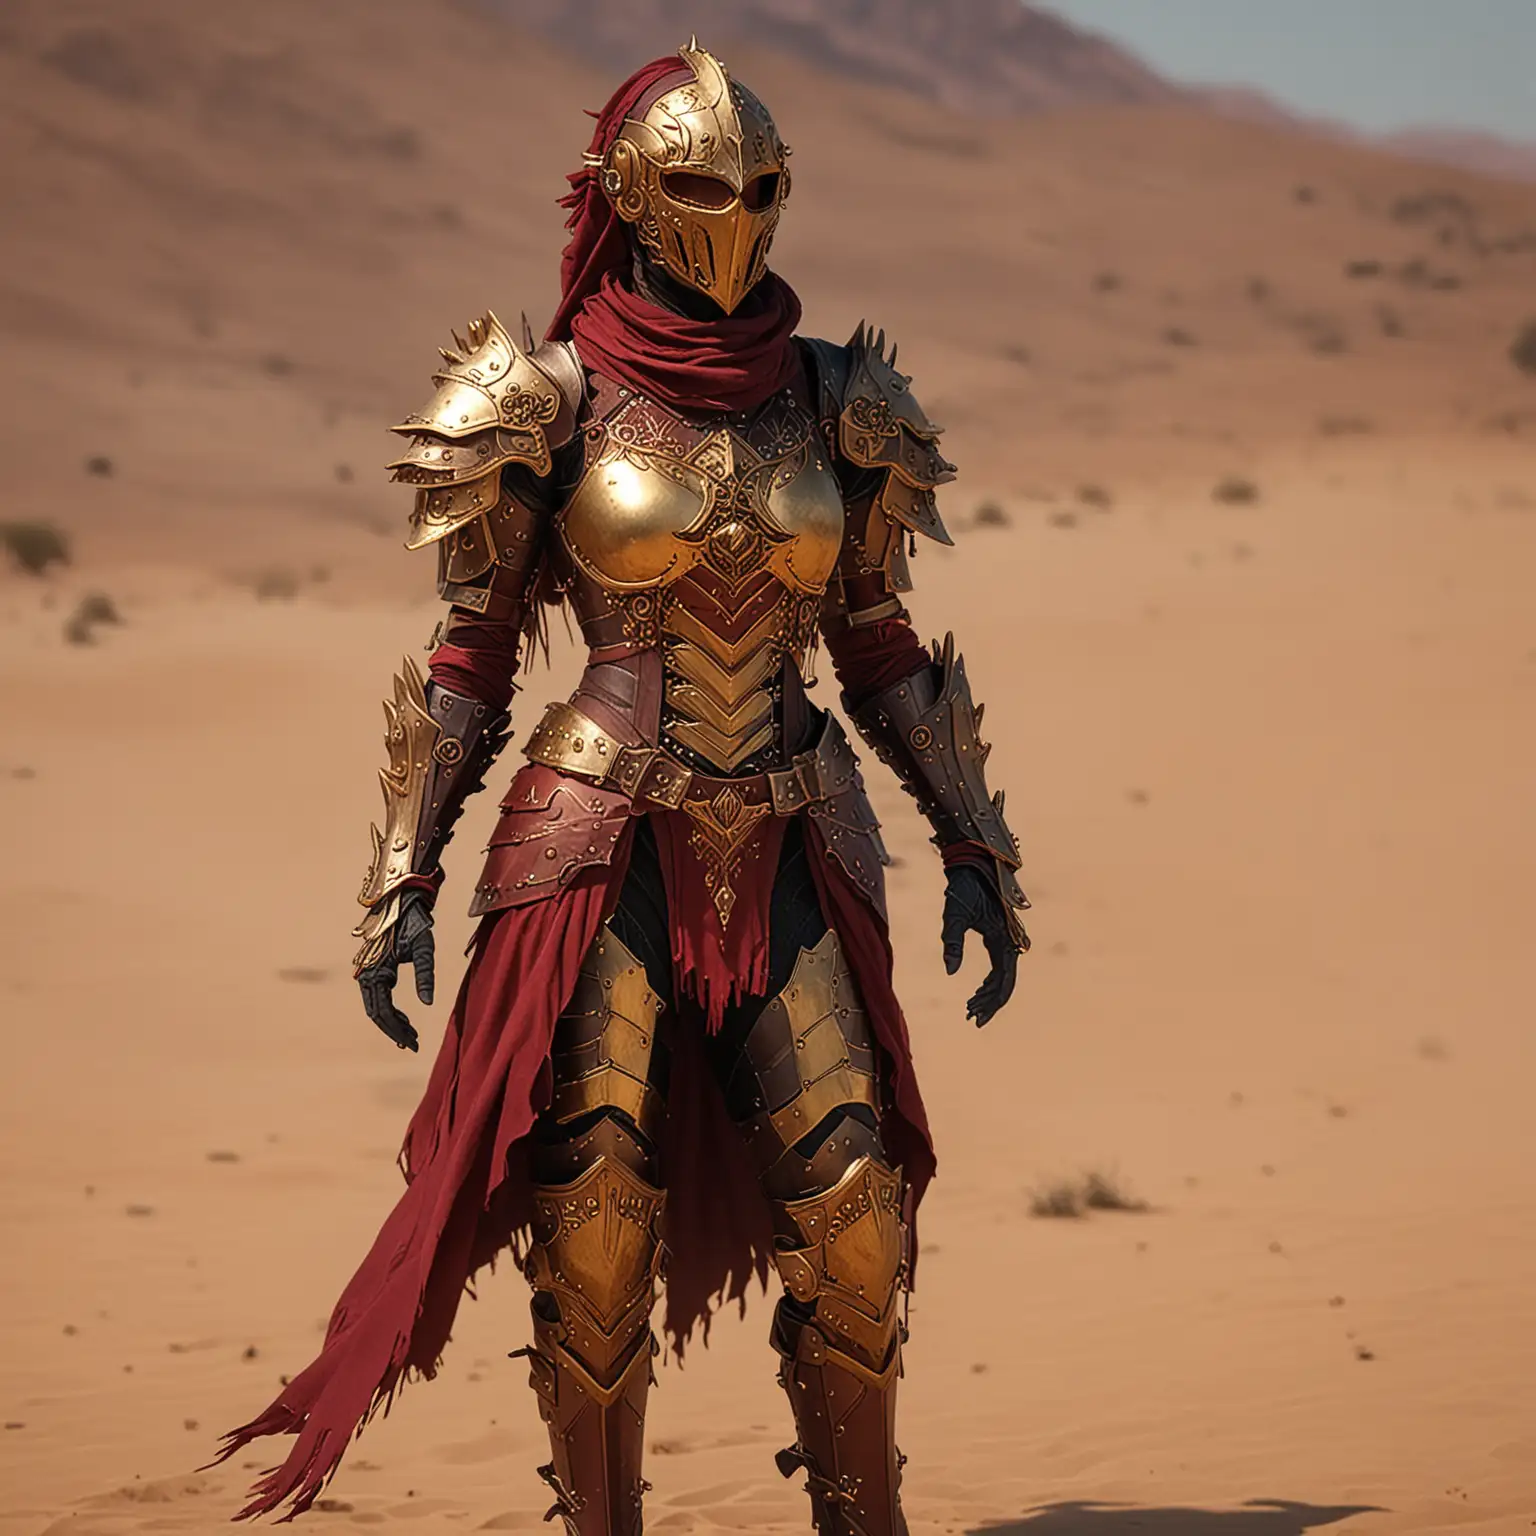 Bold Pyromancer in Wine Red and Gold Armor amidst a Red Desert